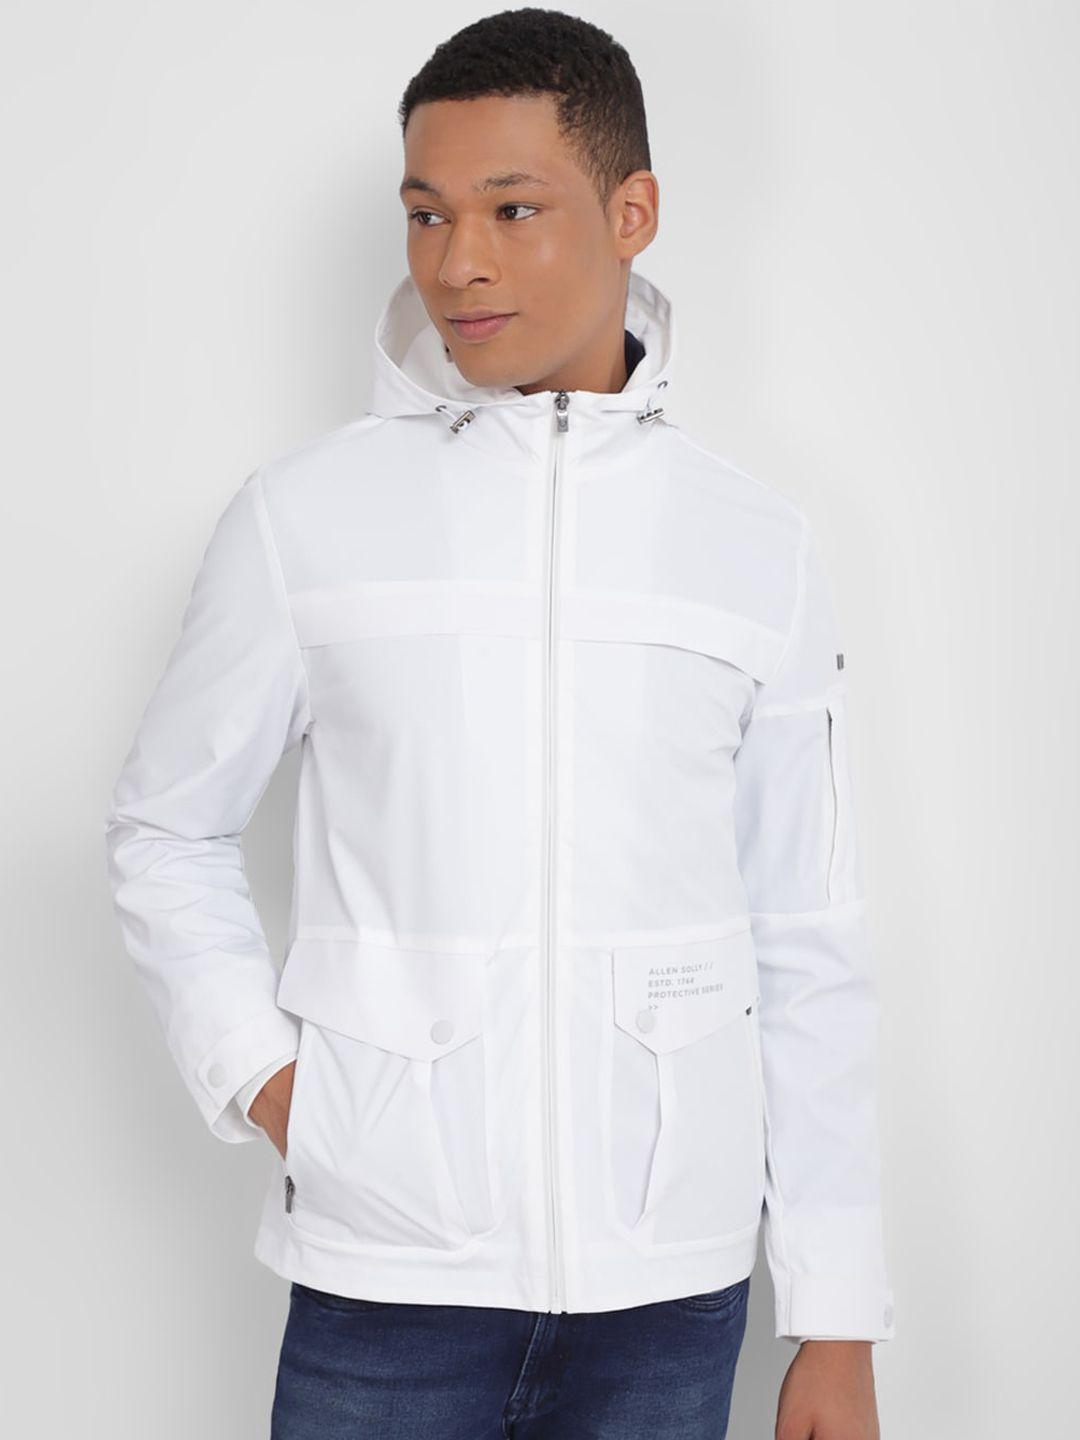 allen solly hooded pure cotton parka jacket